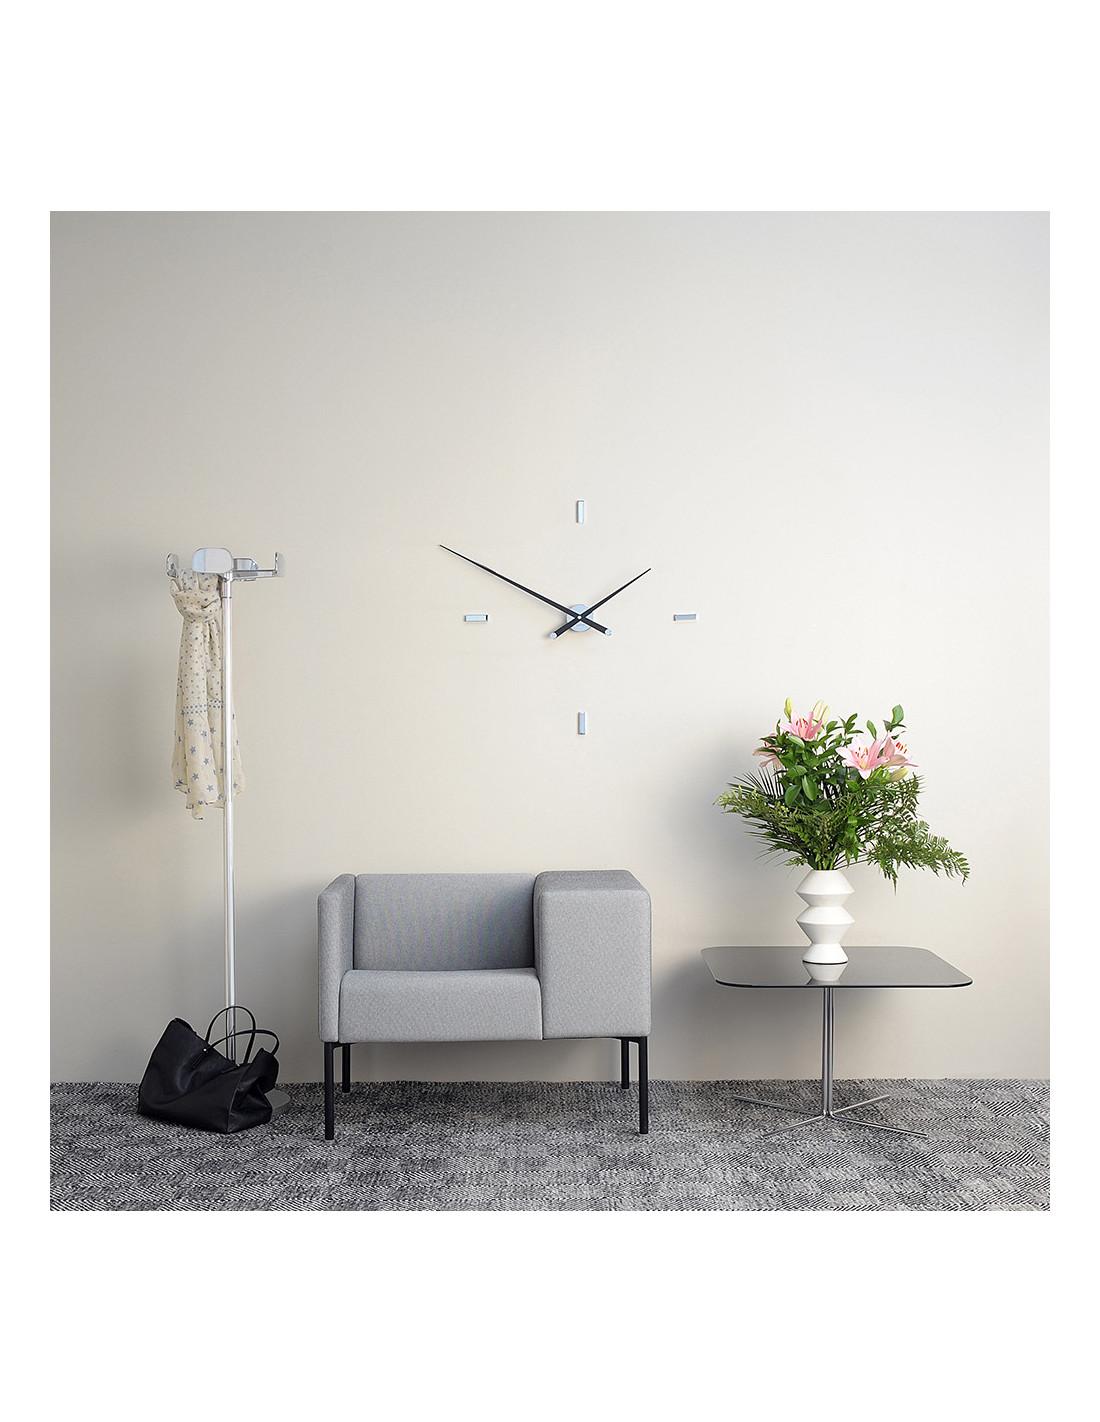 Tacón 4 L wall clock shows simple clean forms and subtle elegance adding the natural touch of lacquered walnut wood, which also provides a sense of fluidity between the spaces in your home. 
Tacón 4 L wall clock: chromed brass, hands in Walnut wood